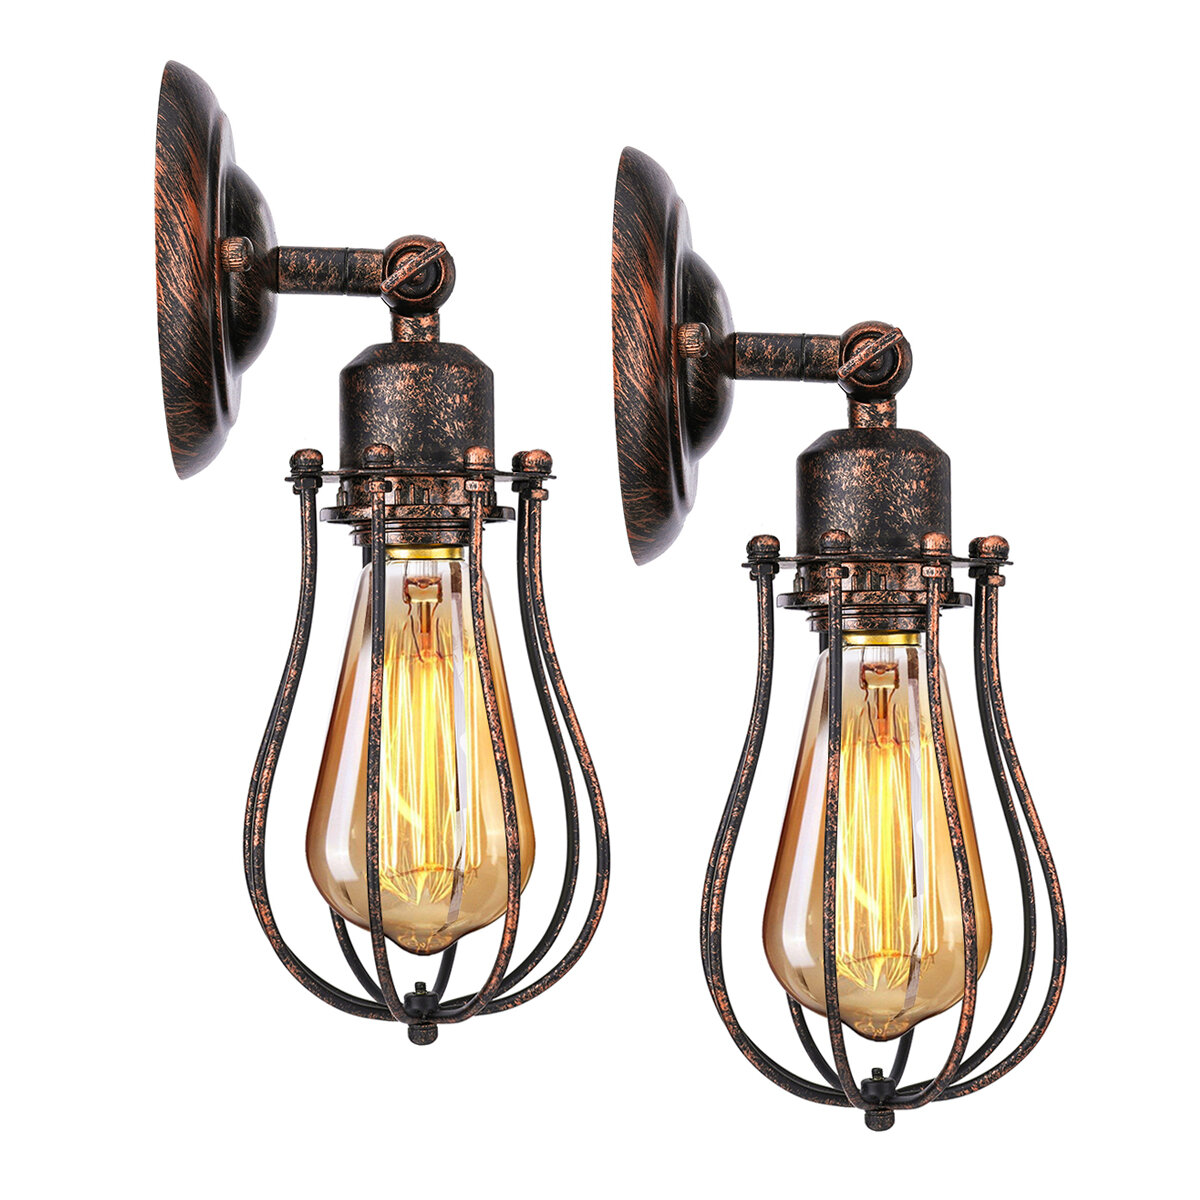 Vintage Industrial Fixture Lighting Lamp with 6.9 Metal Shade and 4.7 Canopy Lamp Fixture for Bathroom Porch Bedroom Living Room Kitchen Study Yosoan 2 Pack Black Metal Wall Fixture 